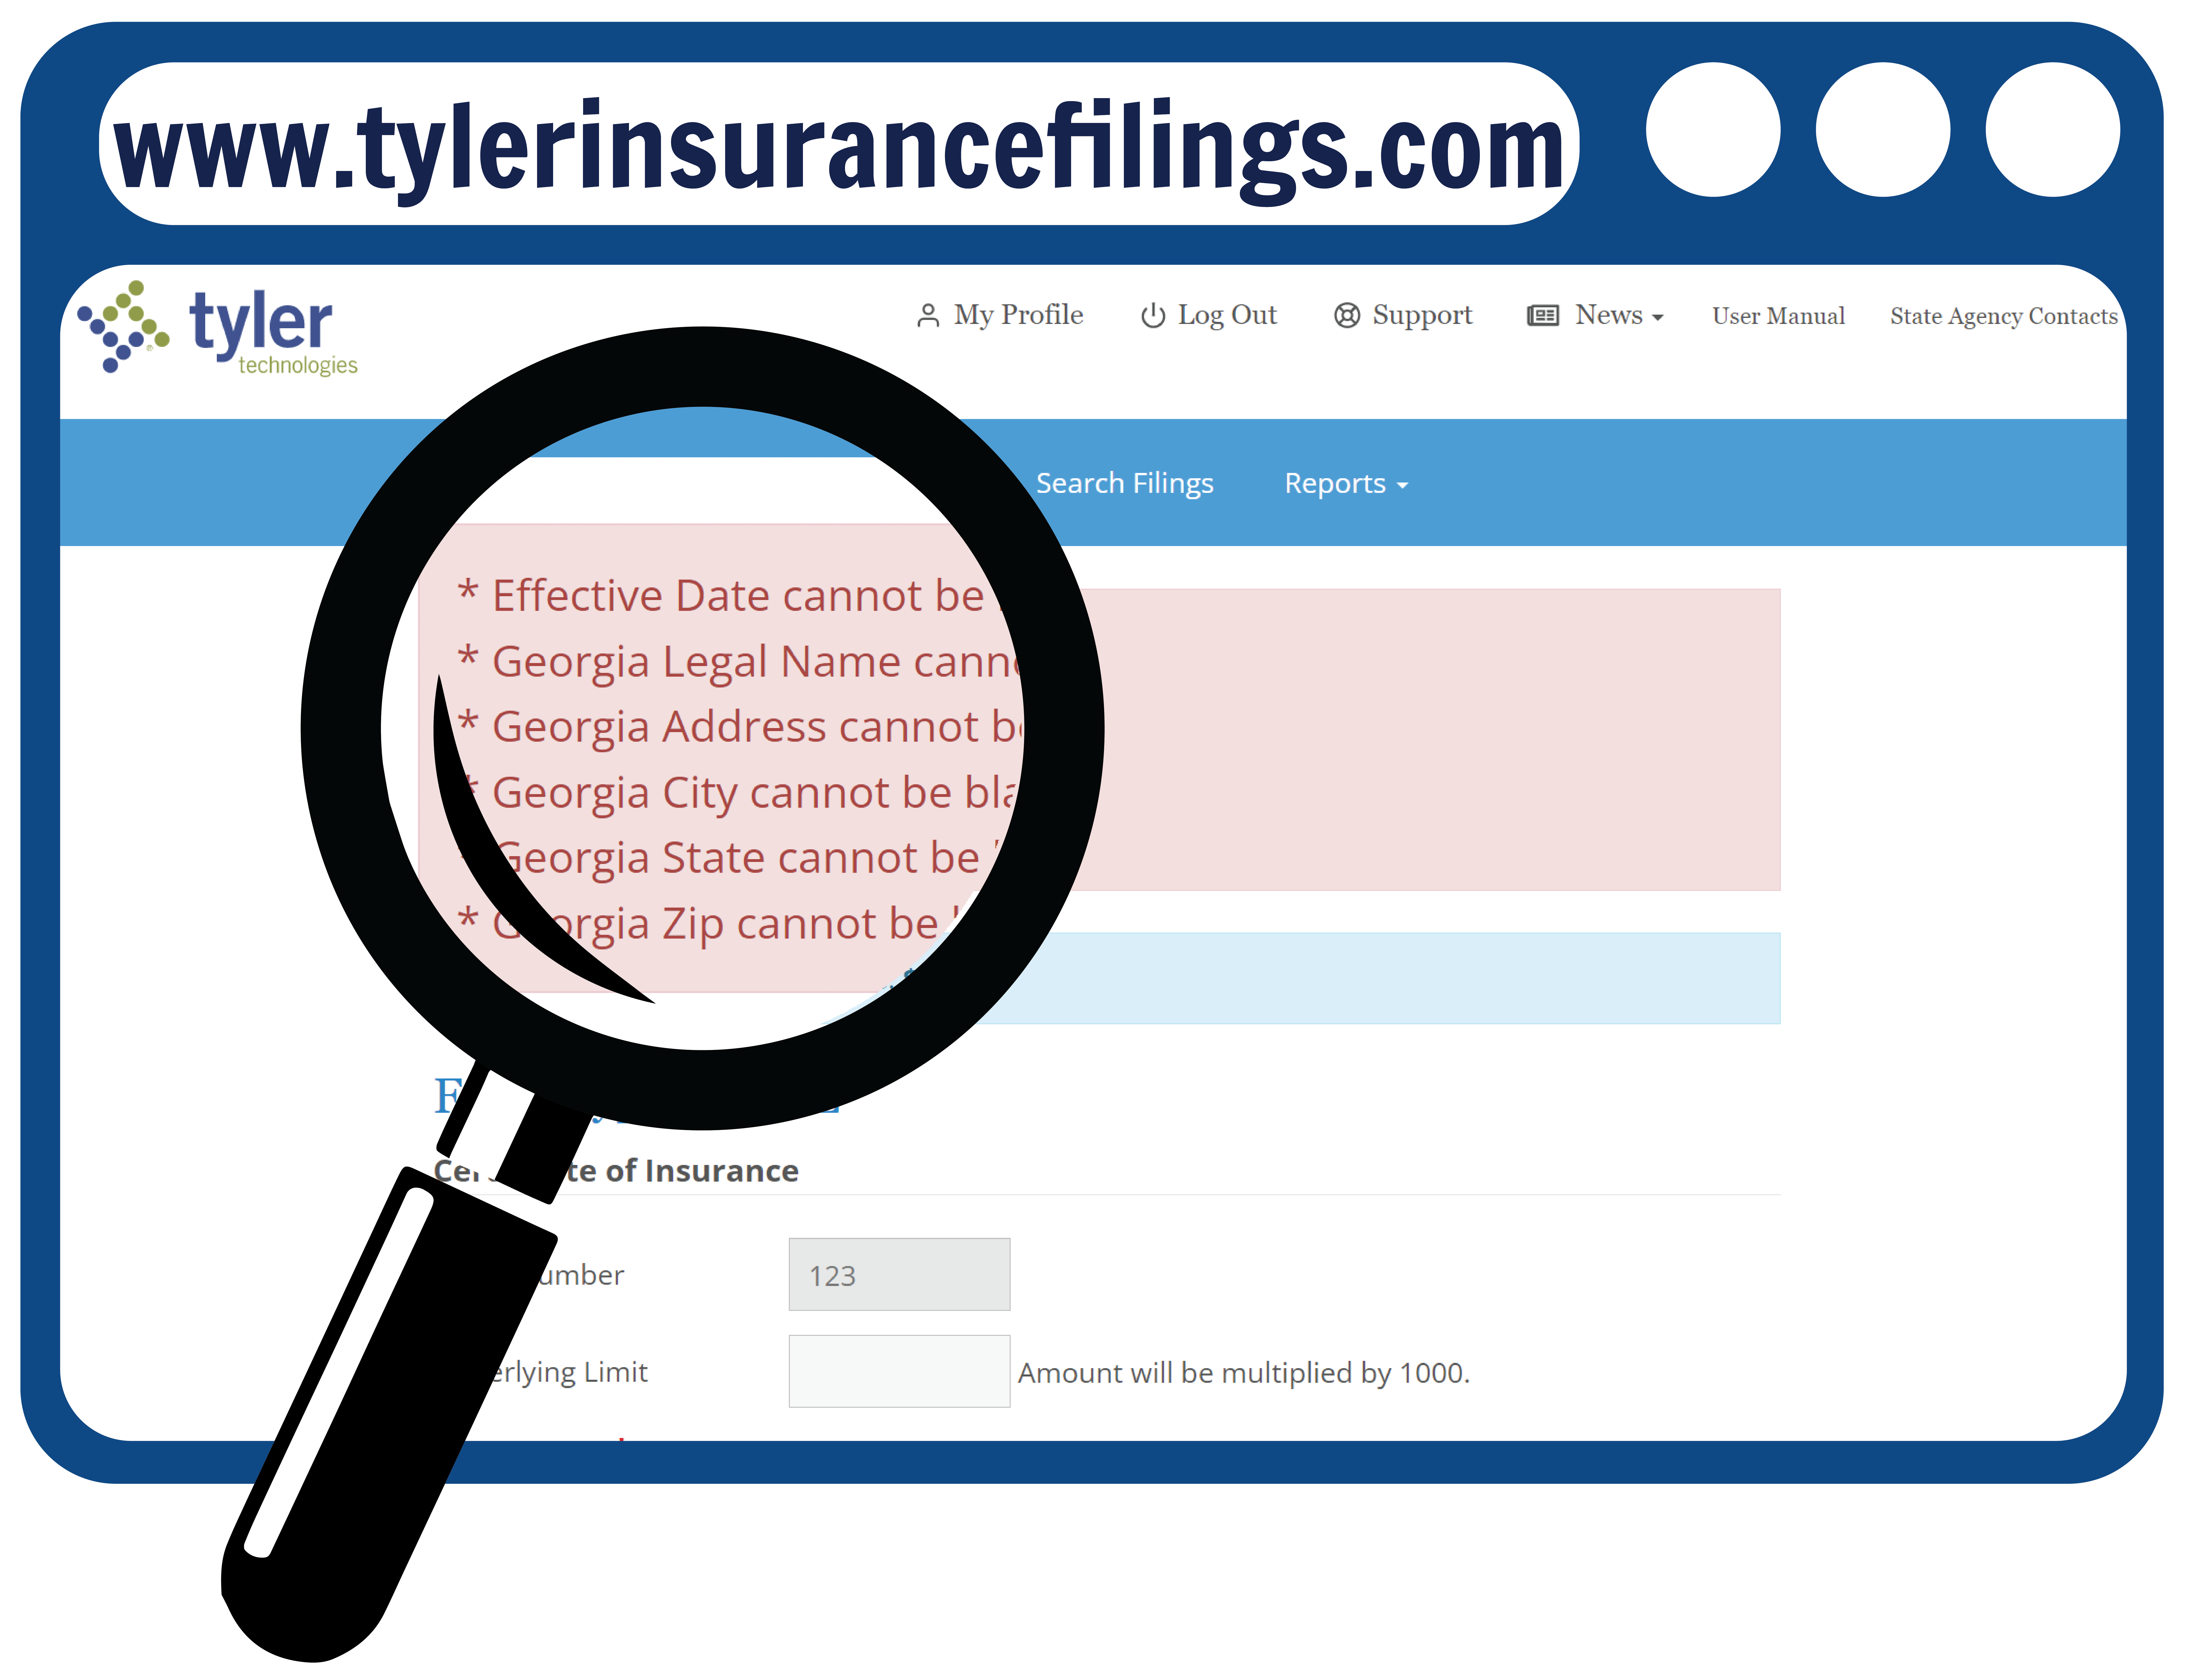 Tyler Insurance Filings automatically validates entered insurance policy data for compliance against agency defined requirements.